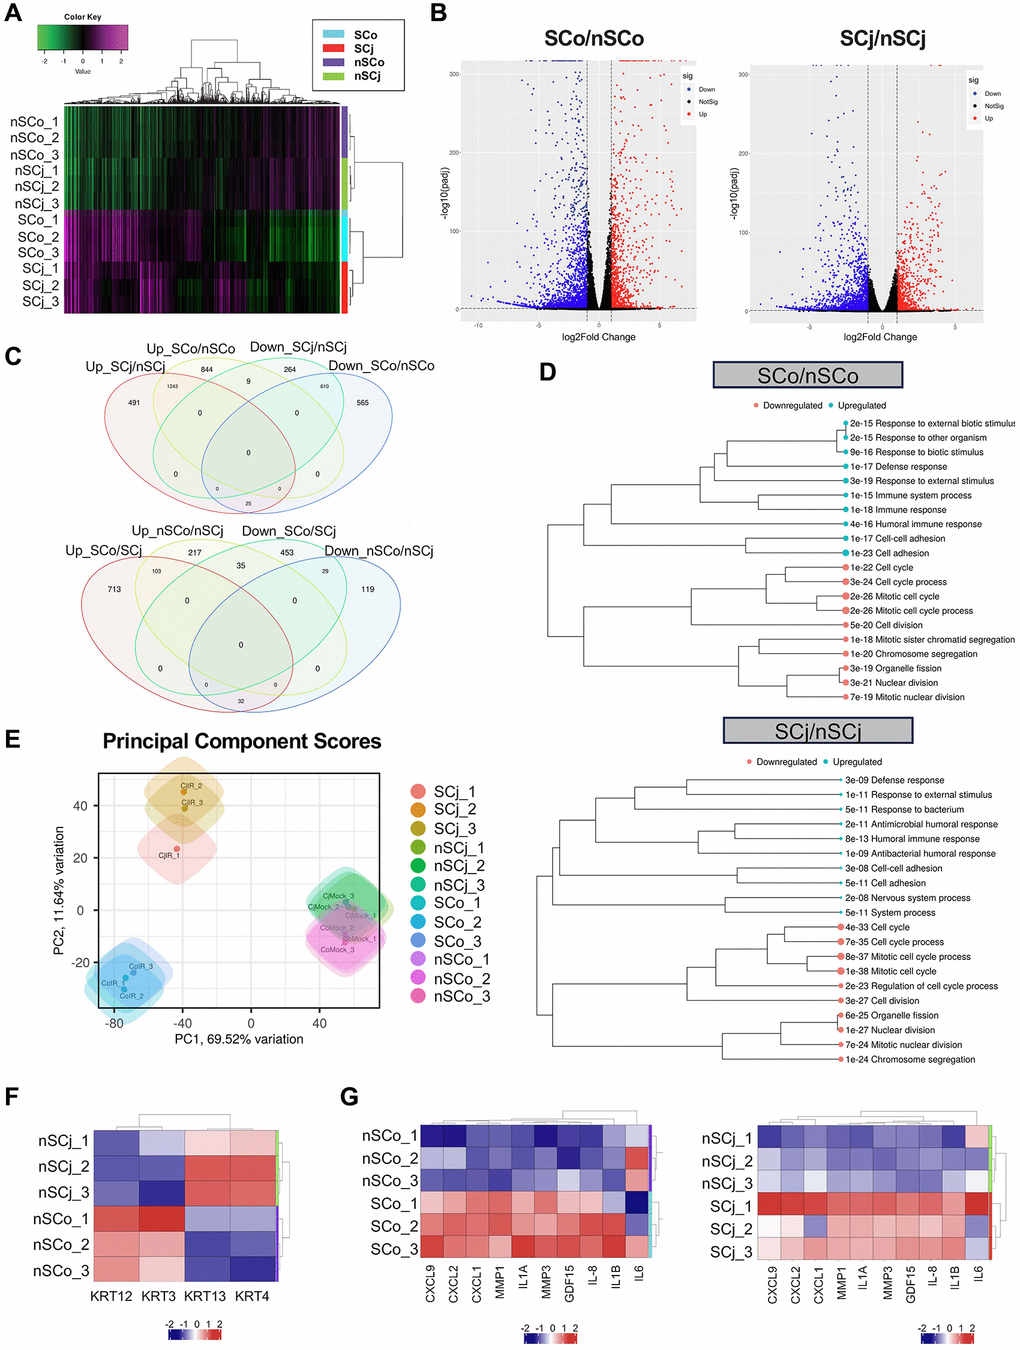 Comprehensive transcriptional analysis of senescent corneal and conjunctival epithelial cells. (A) Clustering analysis of senescent CoEpiCs (SCo), non-senescent CoEpiCs (nSCo), senescent CjEpiCs (SCj) and non-senescent CjEpiCs (nSCj) (n = 3 for each condition). (B) Volcano plot comparing SCo and nSCo (left panel), as well as SCj and nSCj (right panel). (C) Analysis of differentially expressed genes in SCo, nSCo, SCj, and nSCj. (D) Gene ontology analysis of upregulated or downregulated genes comparing SCo and nSCo (top panel), as well as SCj and nSCj (bottom panel). (E) Principal component analysis of SCo, nSCo, SCj, and nSCj. (F) Expression analysis of cell-specific keratin genes. (G) Expression of senescence-associated secretory phenotype (SASP)-related genes comparing SCo and nSCo (left panel), as well as SCj and nSCj (right panel).